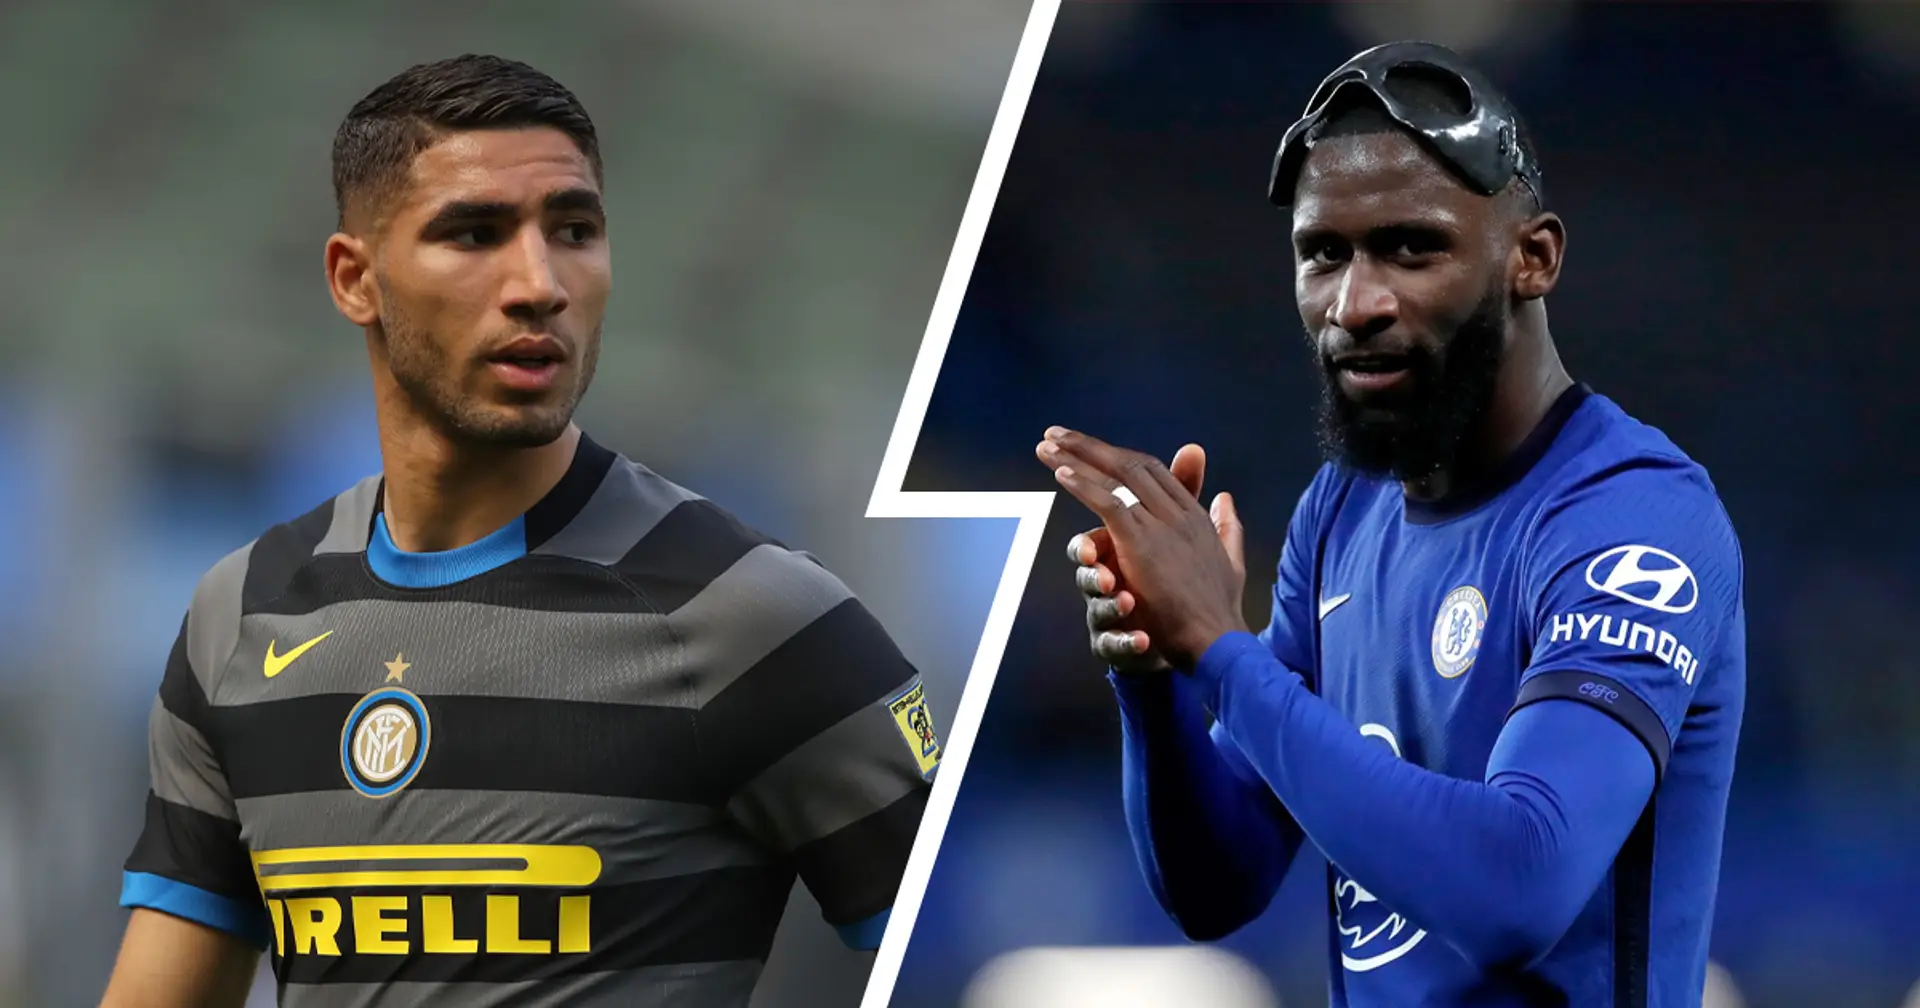 Hakimi update, Rudiger contract issues and more: Latest Chelsea transfer round-up with probability ratings